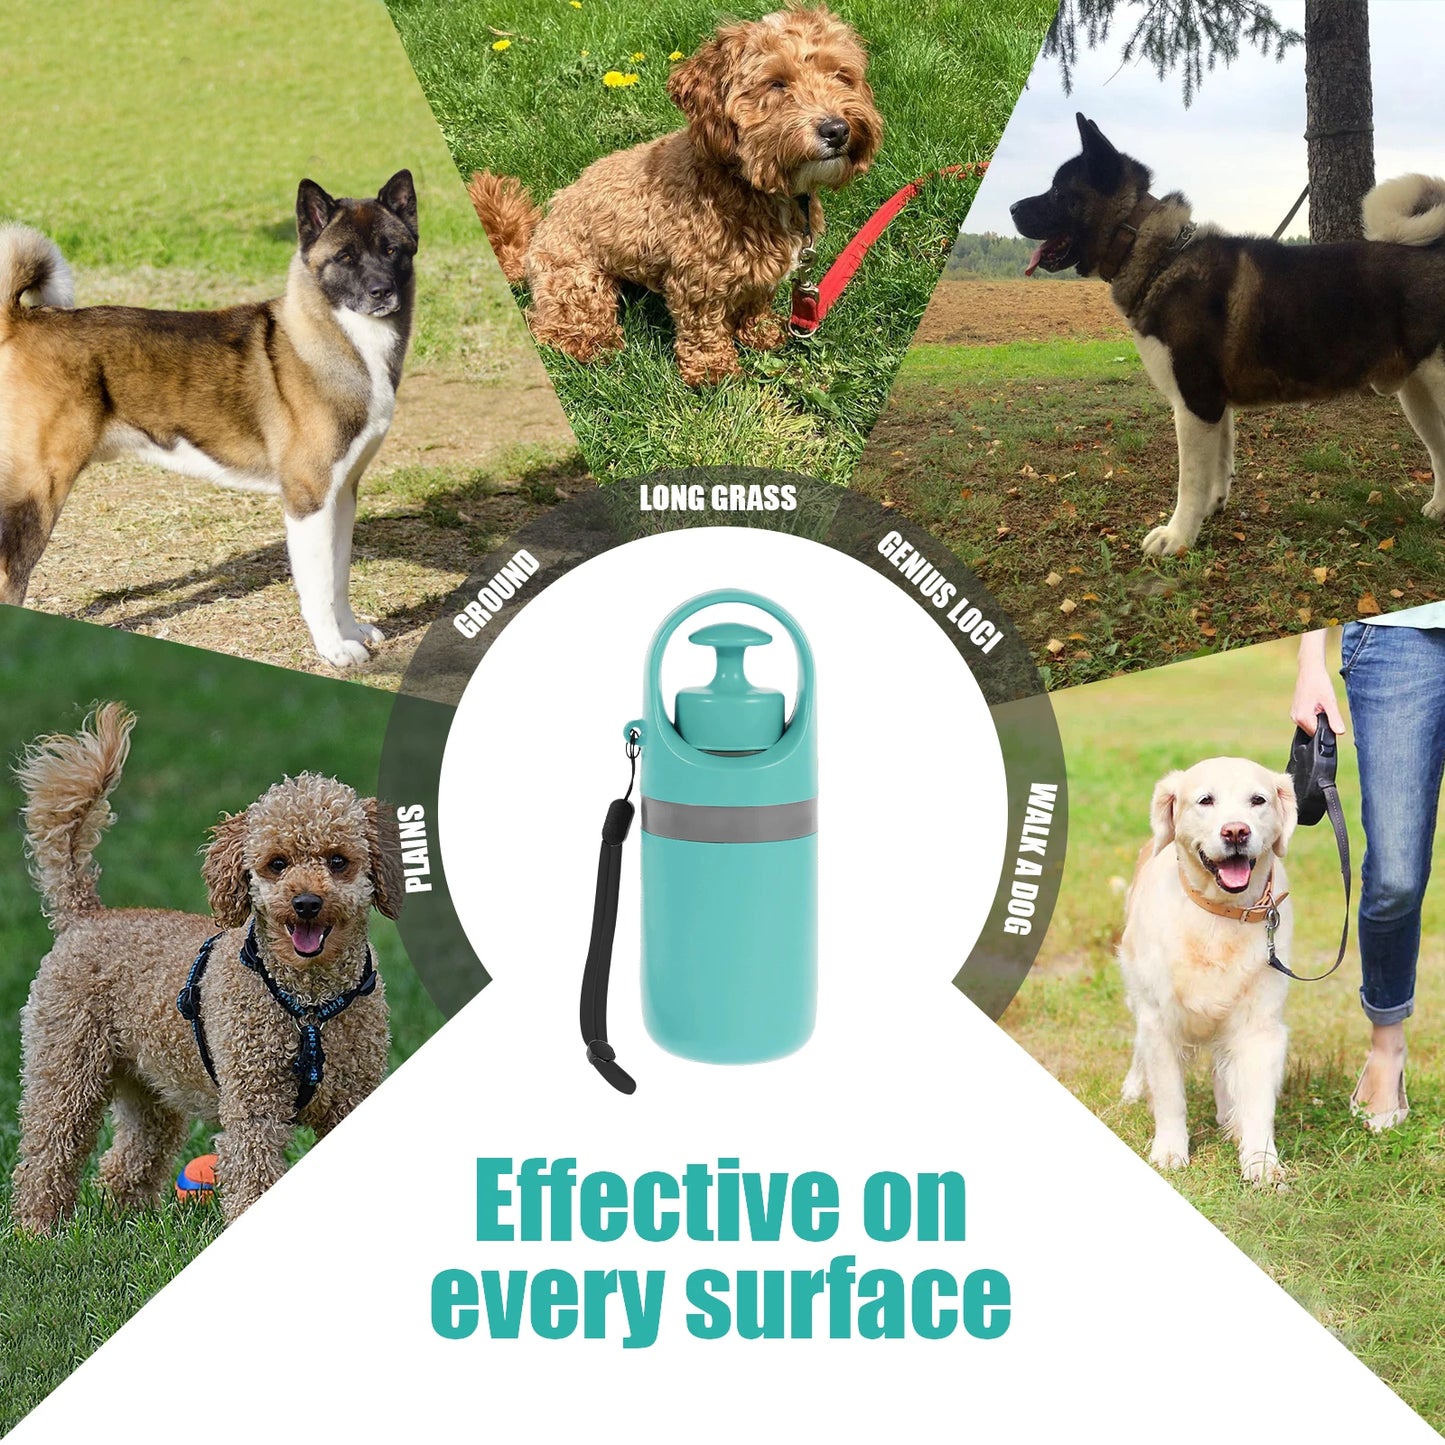 Portable Pet Toilet: Versatile Solution for Outdoor Dog Waste Disposal. This image showcases a collapsible pet waste bag holder and shovel set, designed for convenient cleanup on various surfaces like grass, gravel, and dirt. The product's features are highlighted through the surrounding images of different dog breeds in outdoor settings.